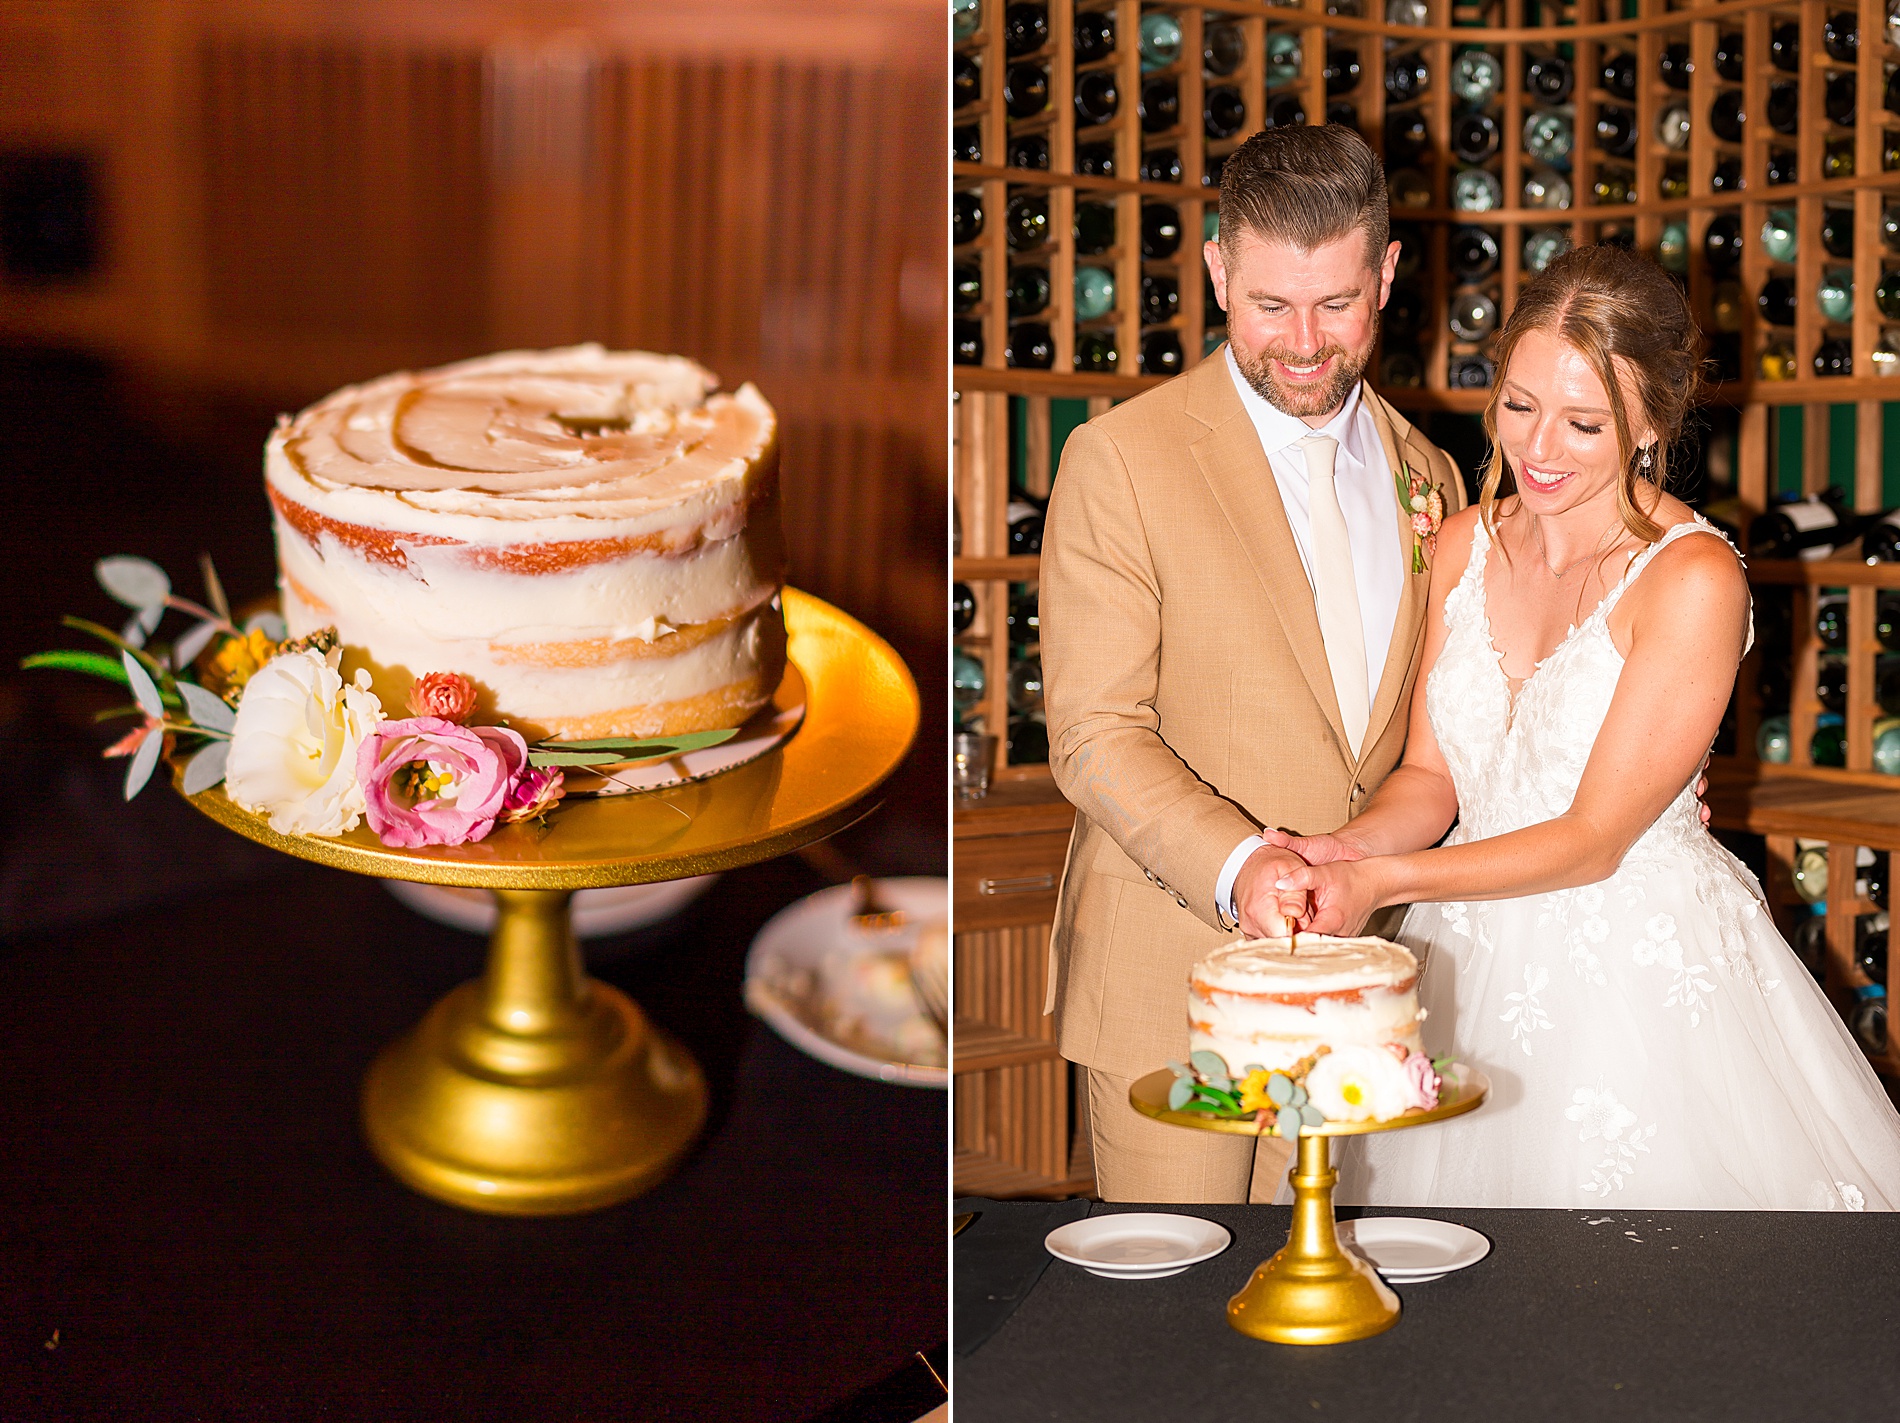 couple share private moment during cake cutting in wine cellar 